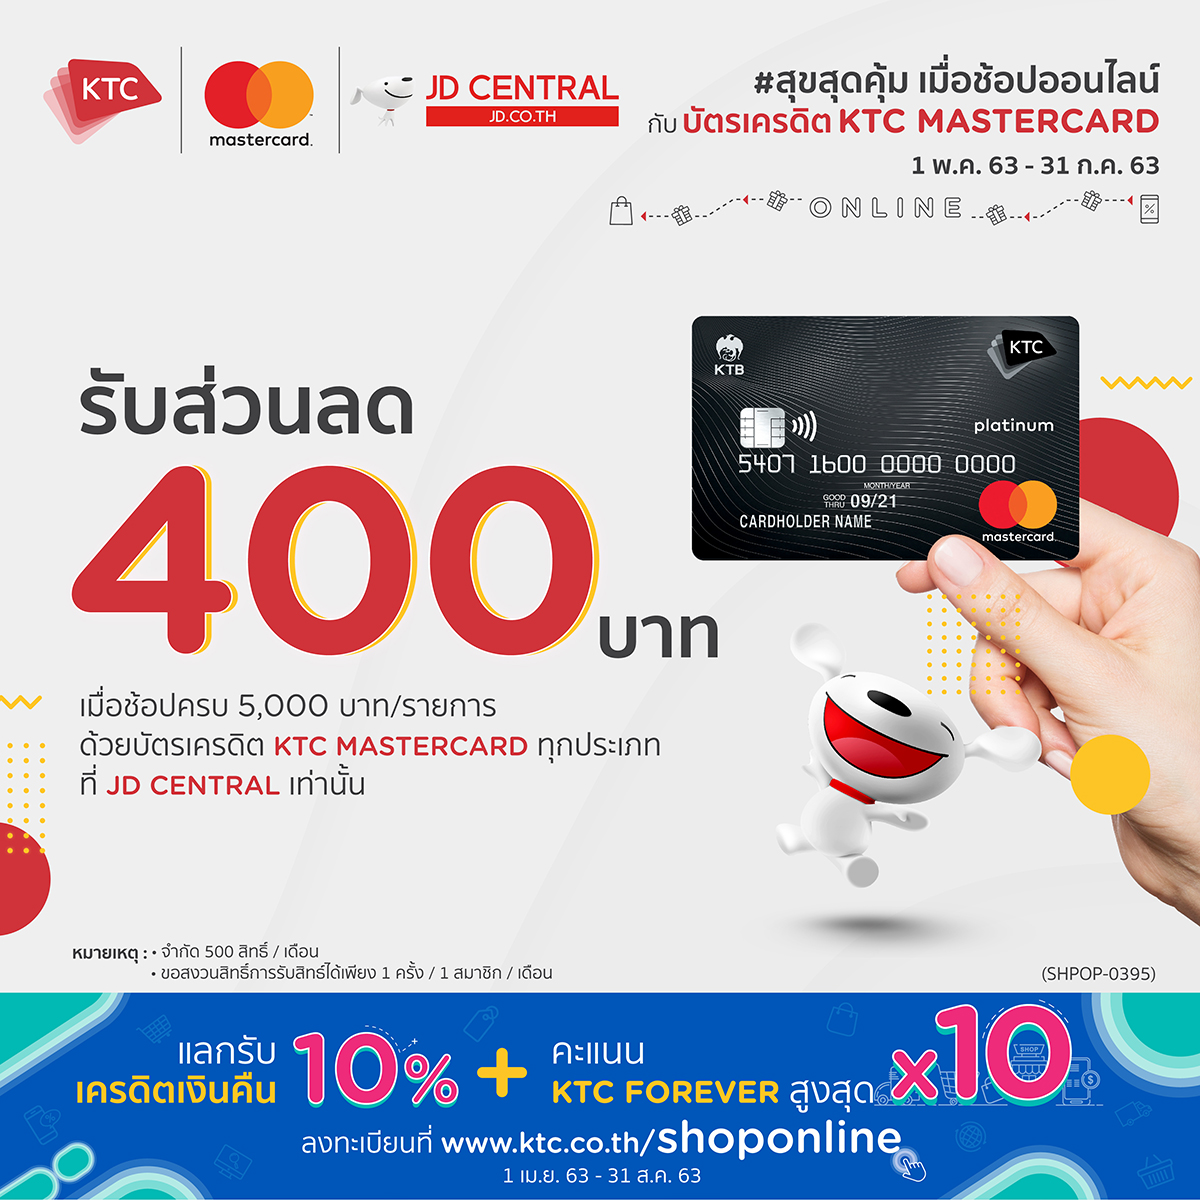 KTC joins hands with JD CENTRAL in fulfilling happiness for KTC-MASTERCARD cardmembers to shop with a value.